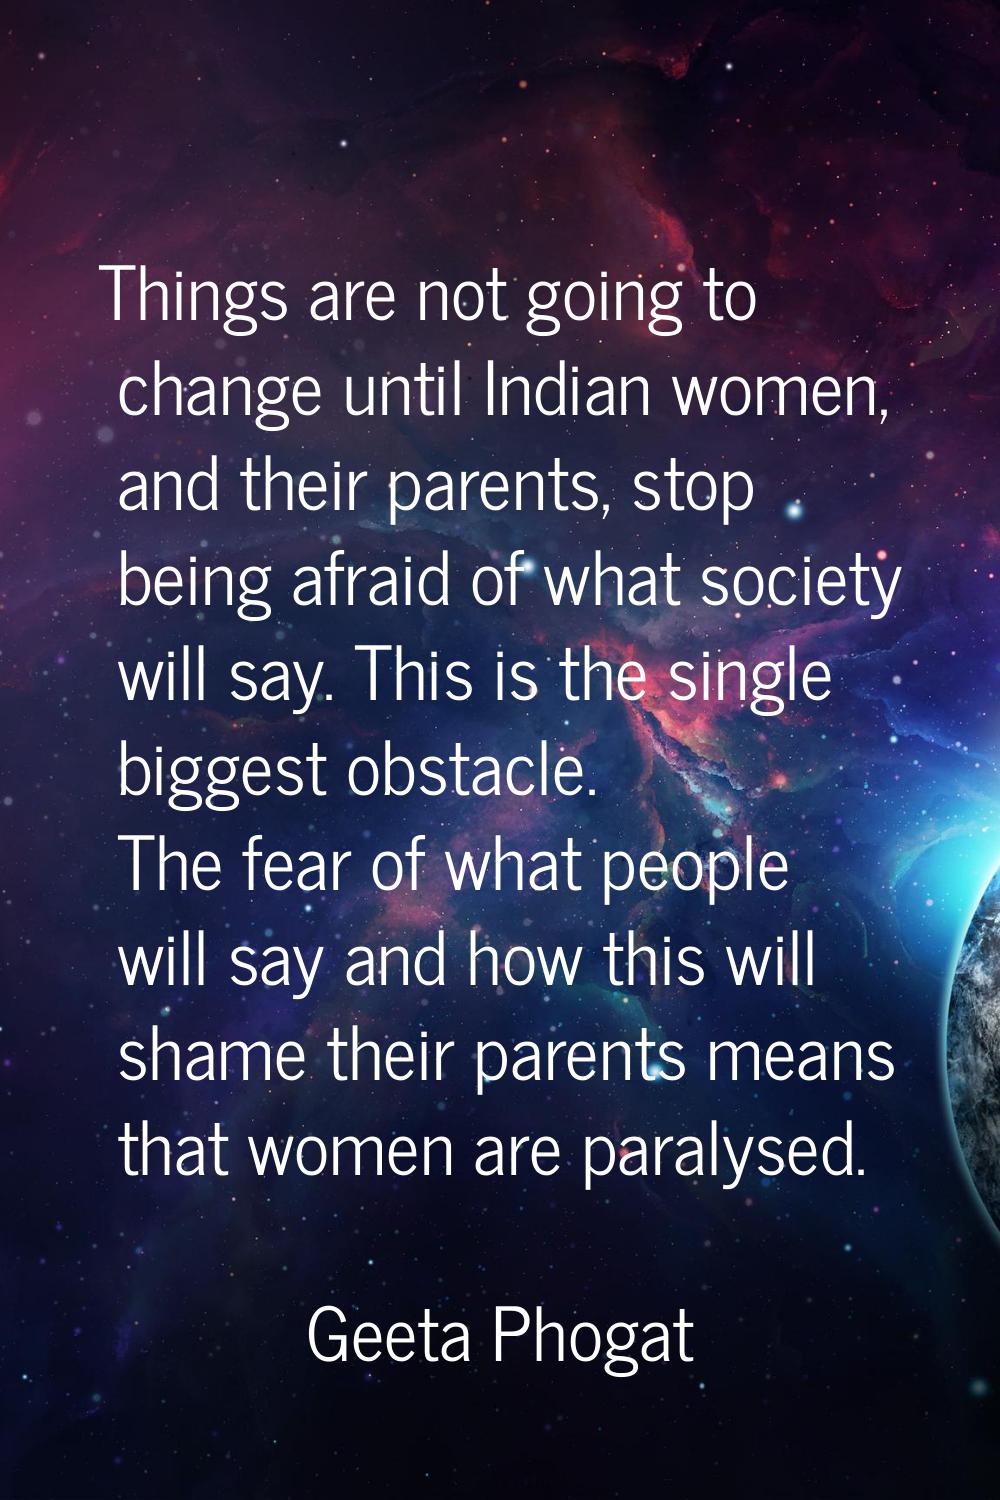 Things are not going to change until Indian women, and their parents, stop being afraid of what soc